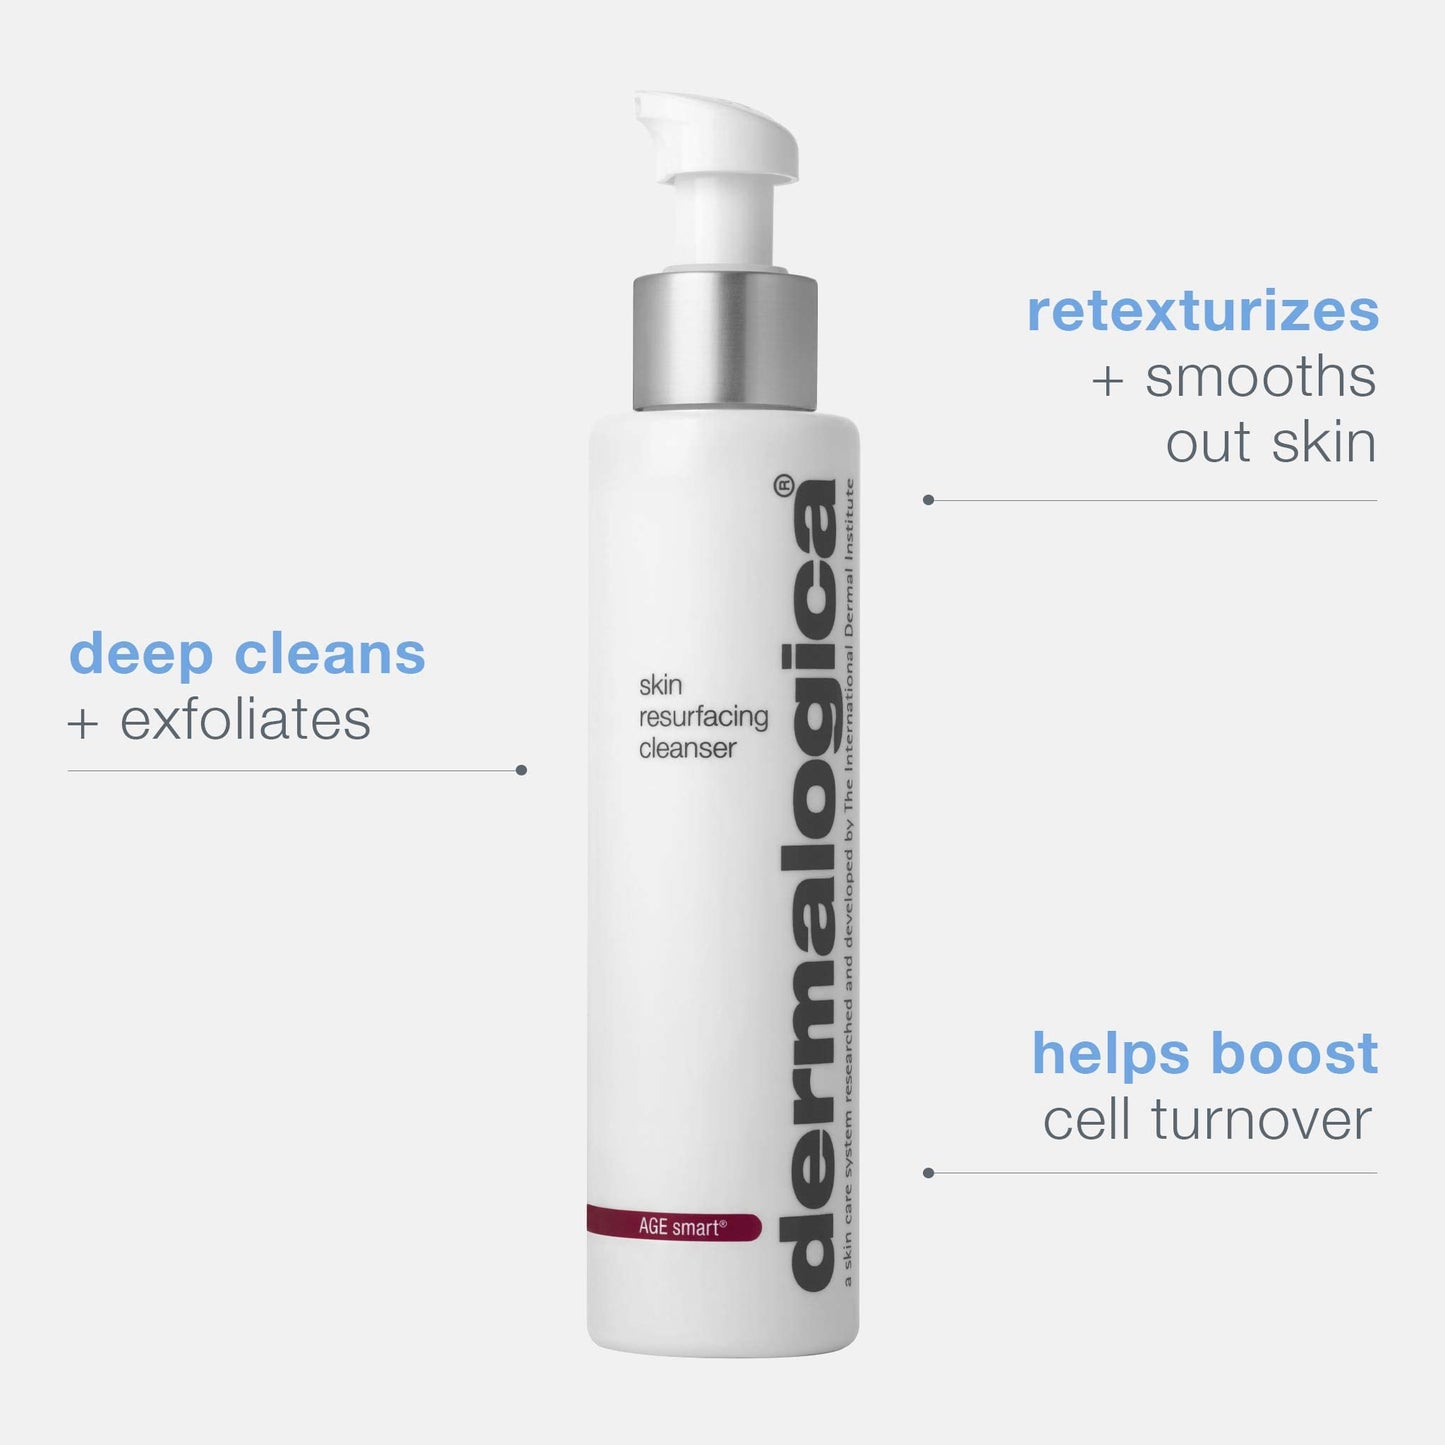 Dermalogica Skin Resurfacing Cleanser, Dual-Action Anti-Aging Exfoliating Face Wash and Cleanser - Smoothes Skin with Lactic Acid, 5.1 Fl Oz